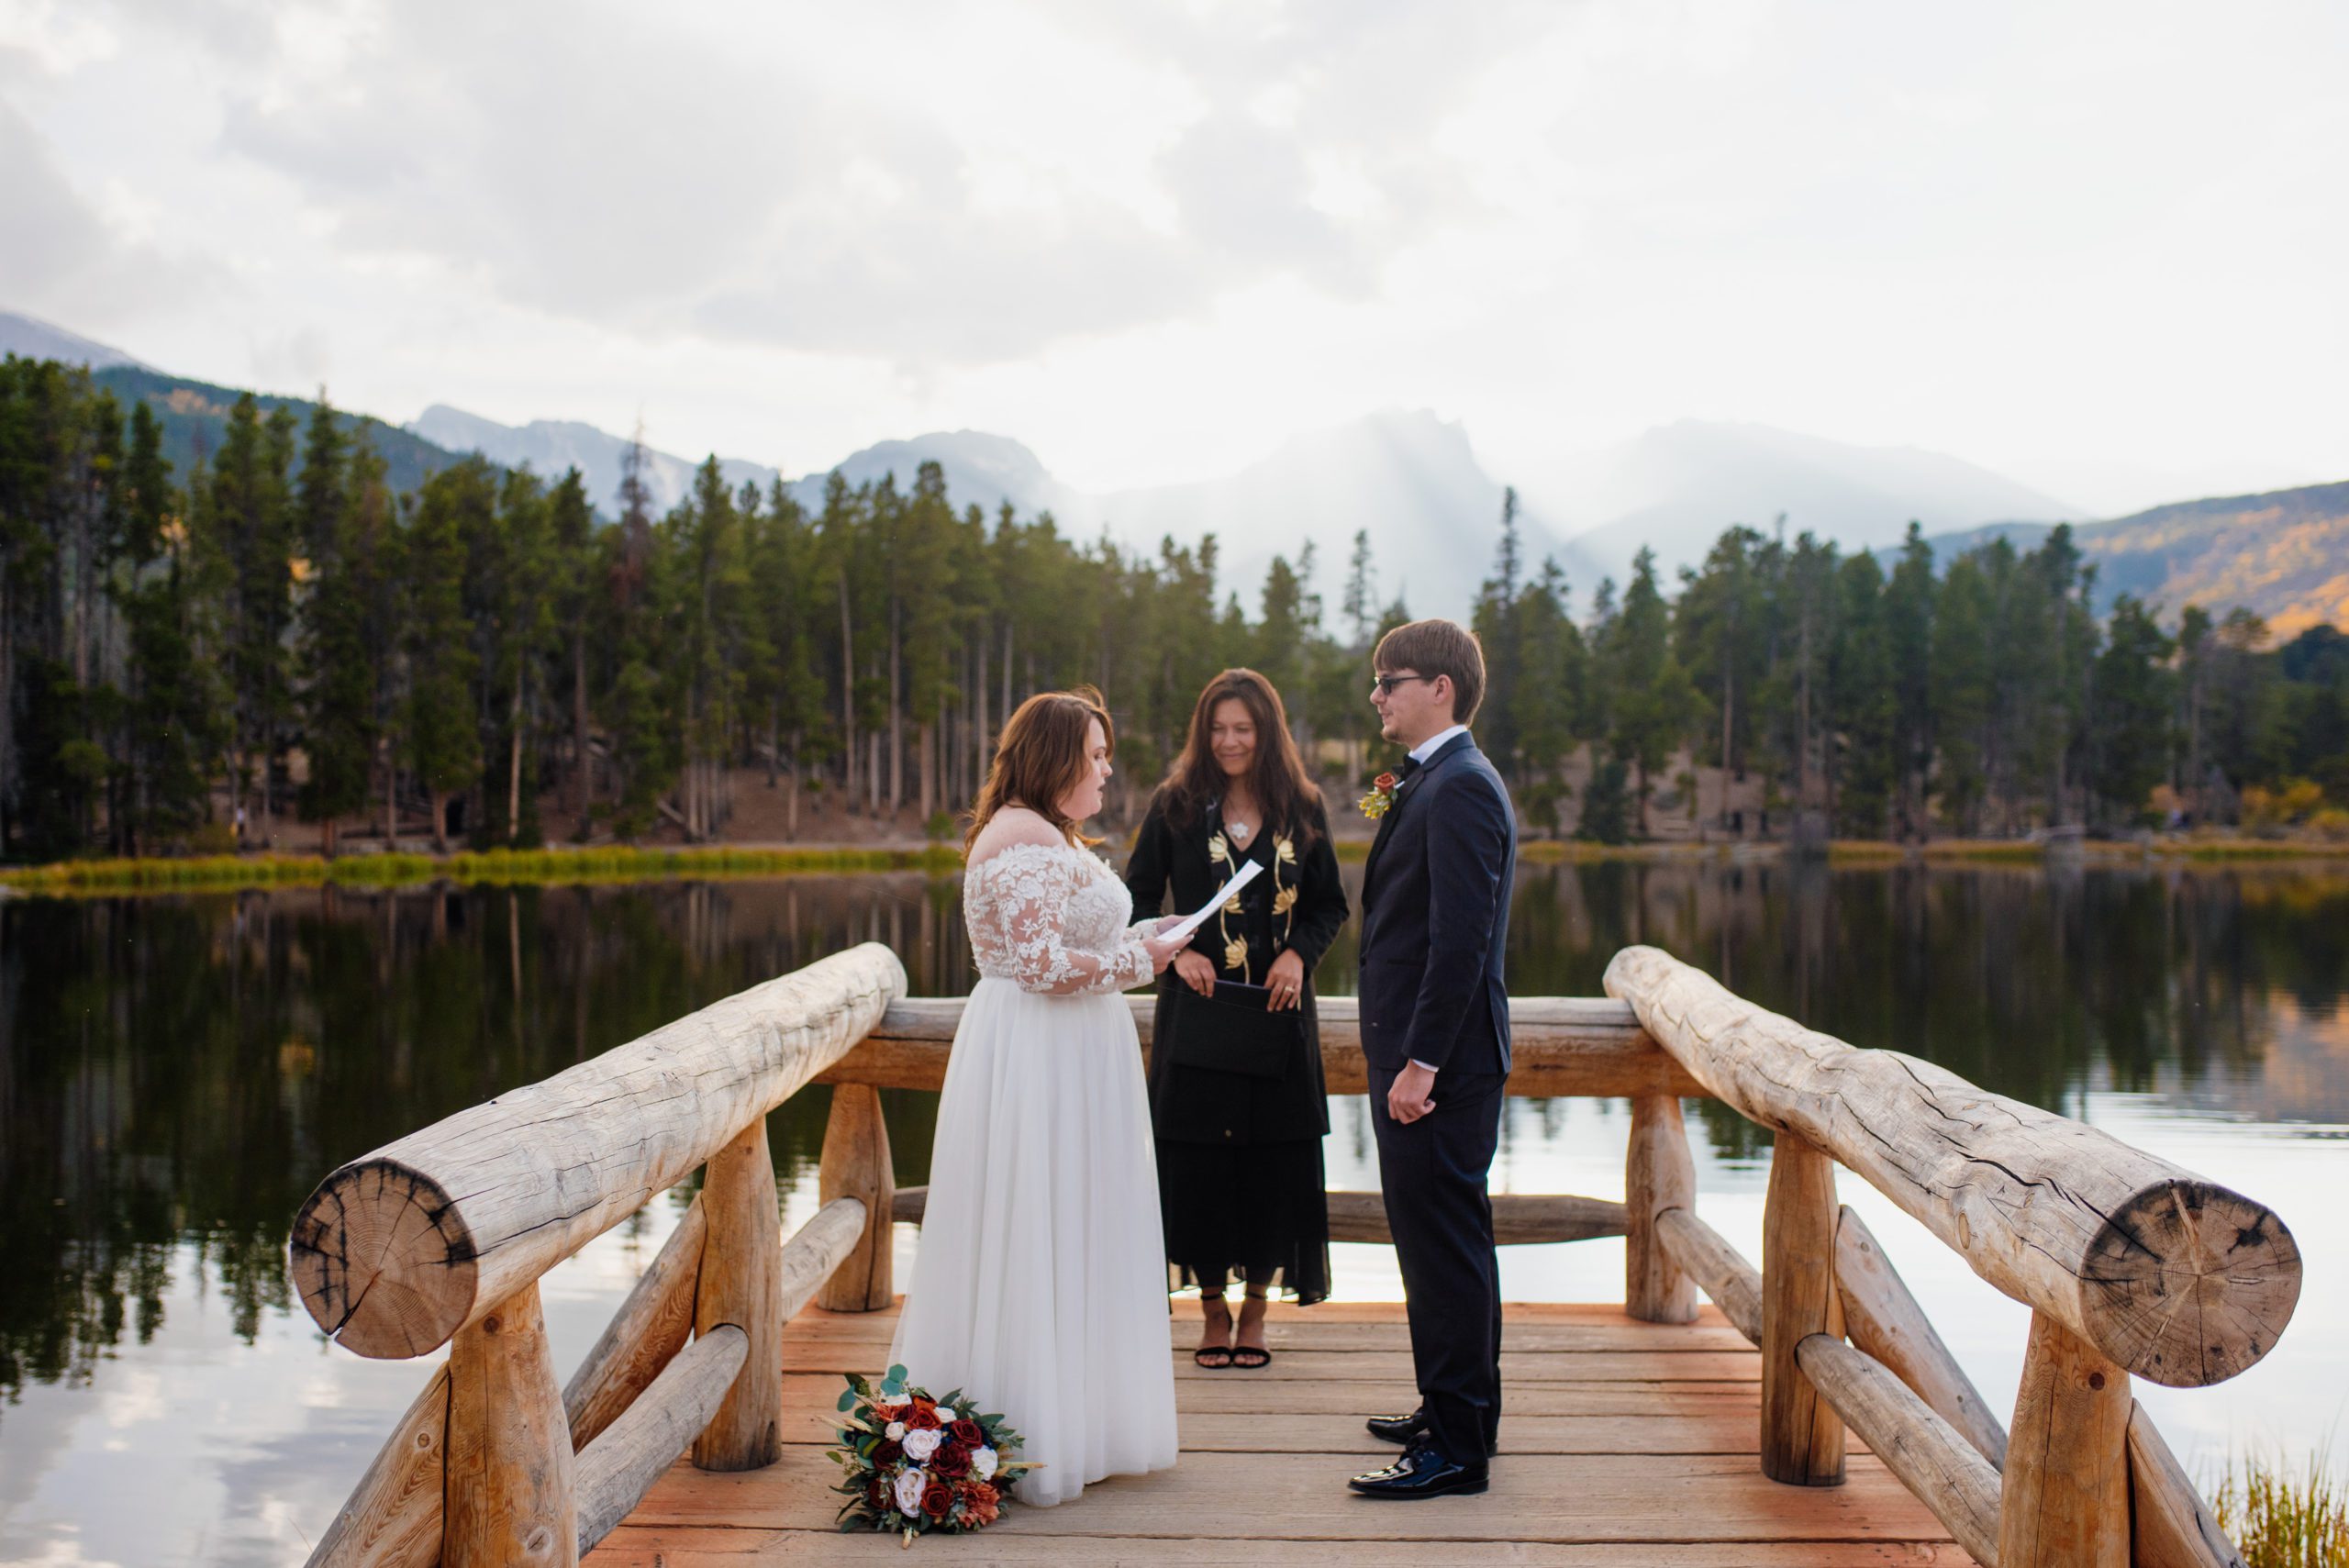 Bride reads vows to groom during elopement ceremony 
at Sprague Lake - RMNP